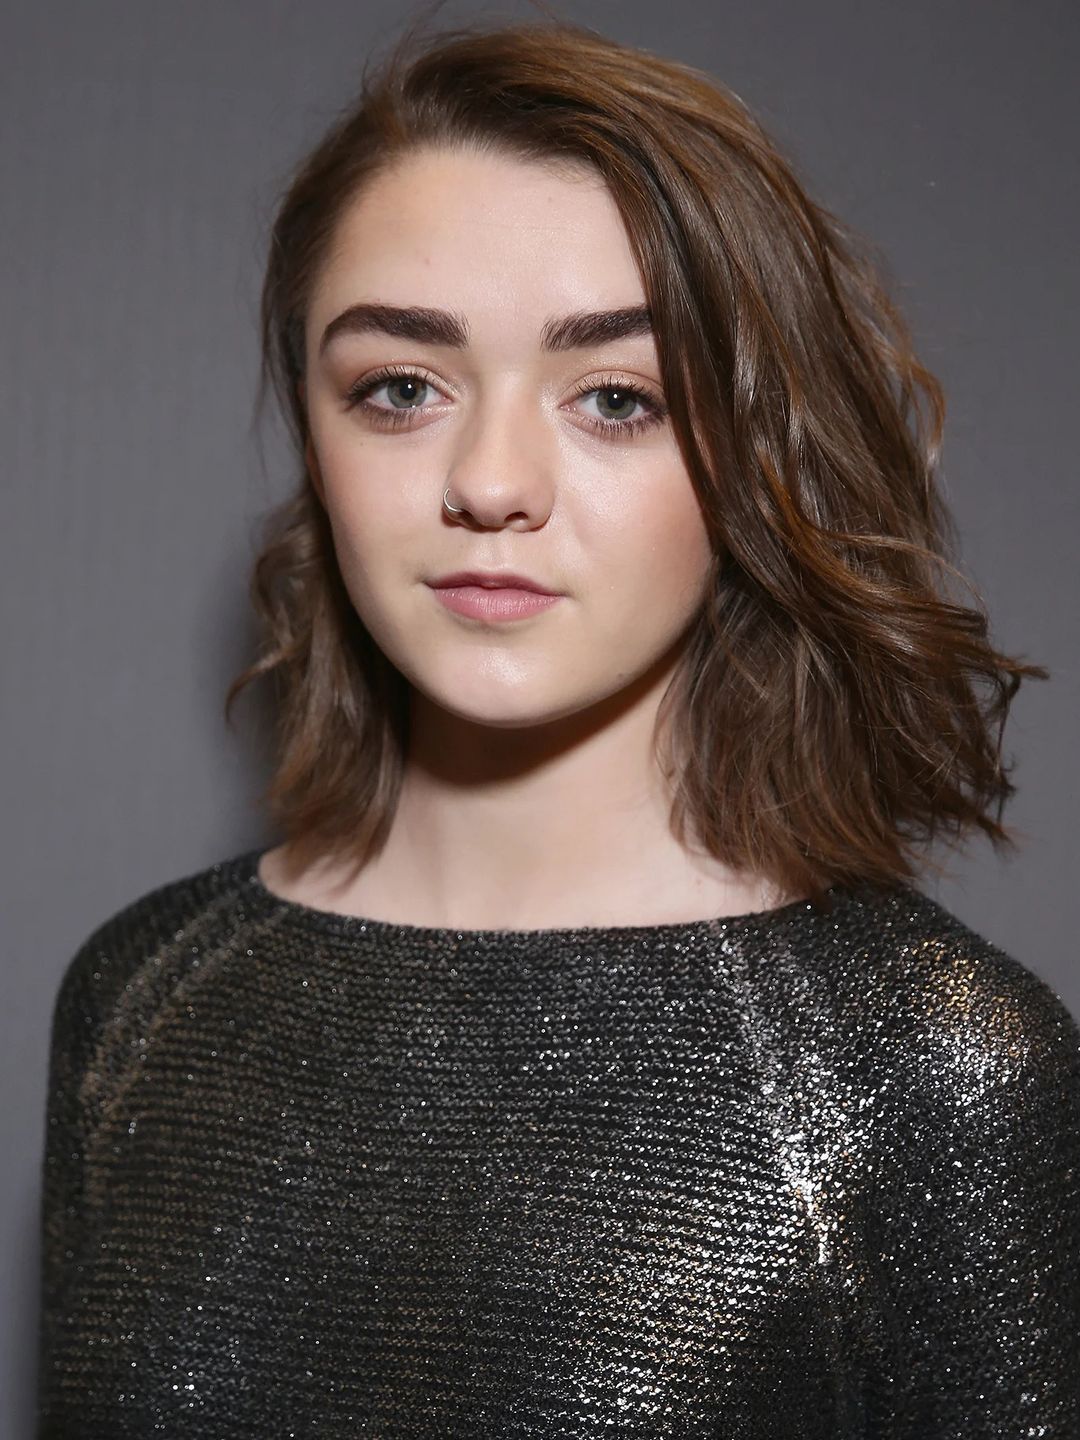 Maisie Williams early career